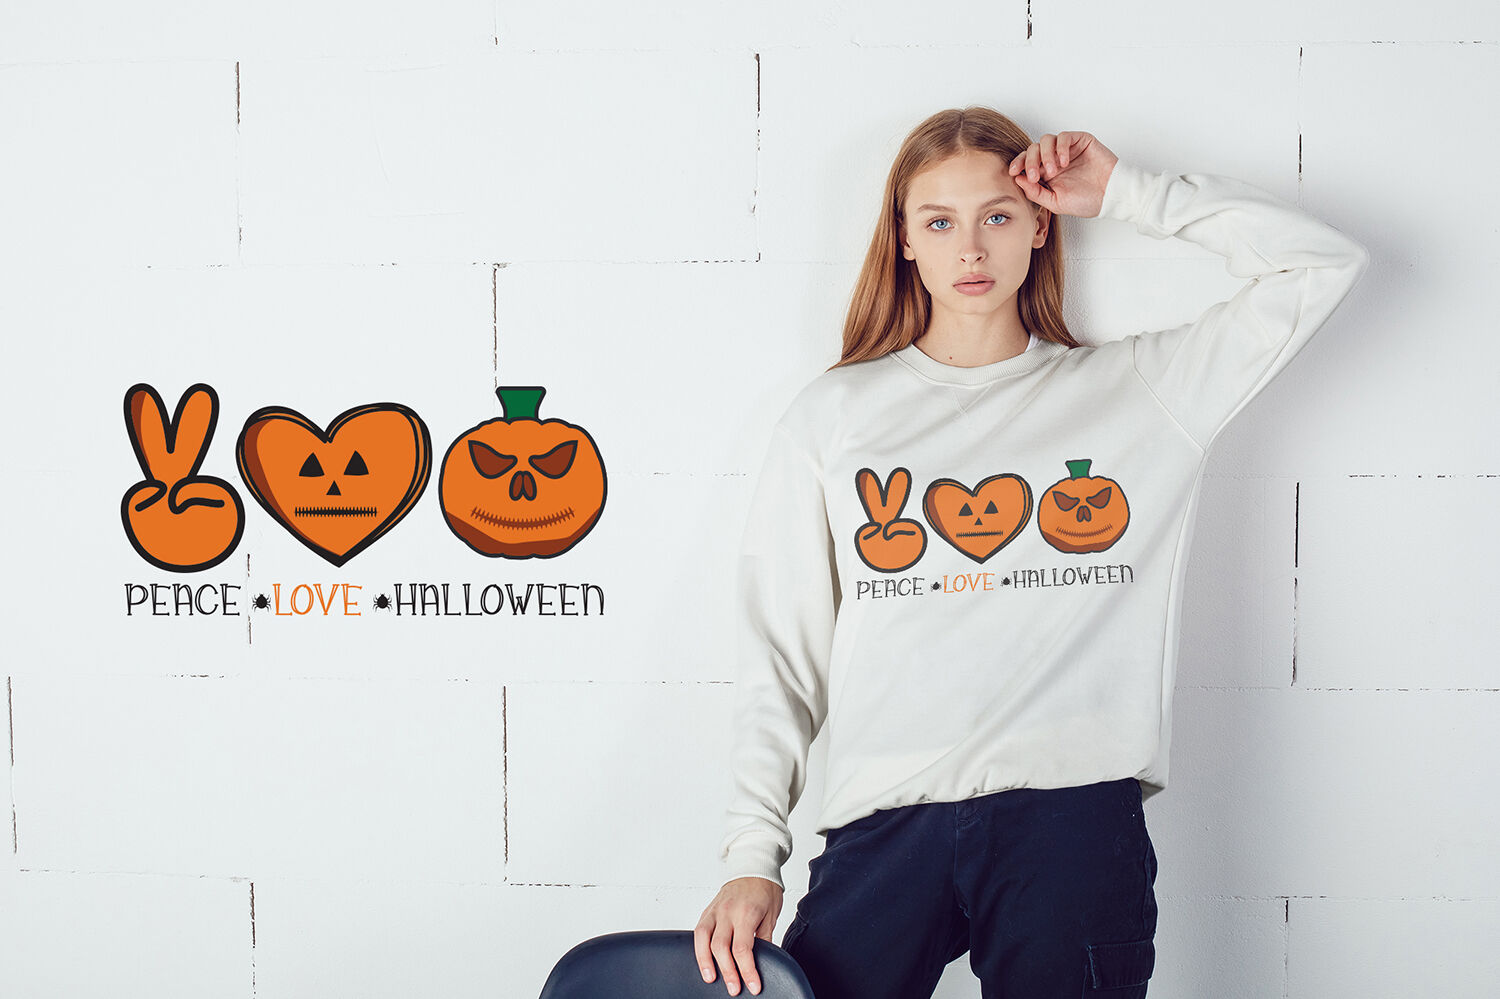 Download Peace Love Halloween Svg Halloween Svg Cut File By Craftlabsvg Thehungryjpeg Com